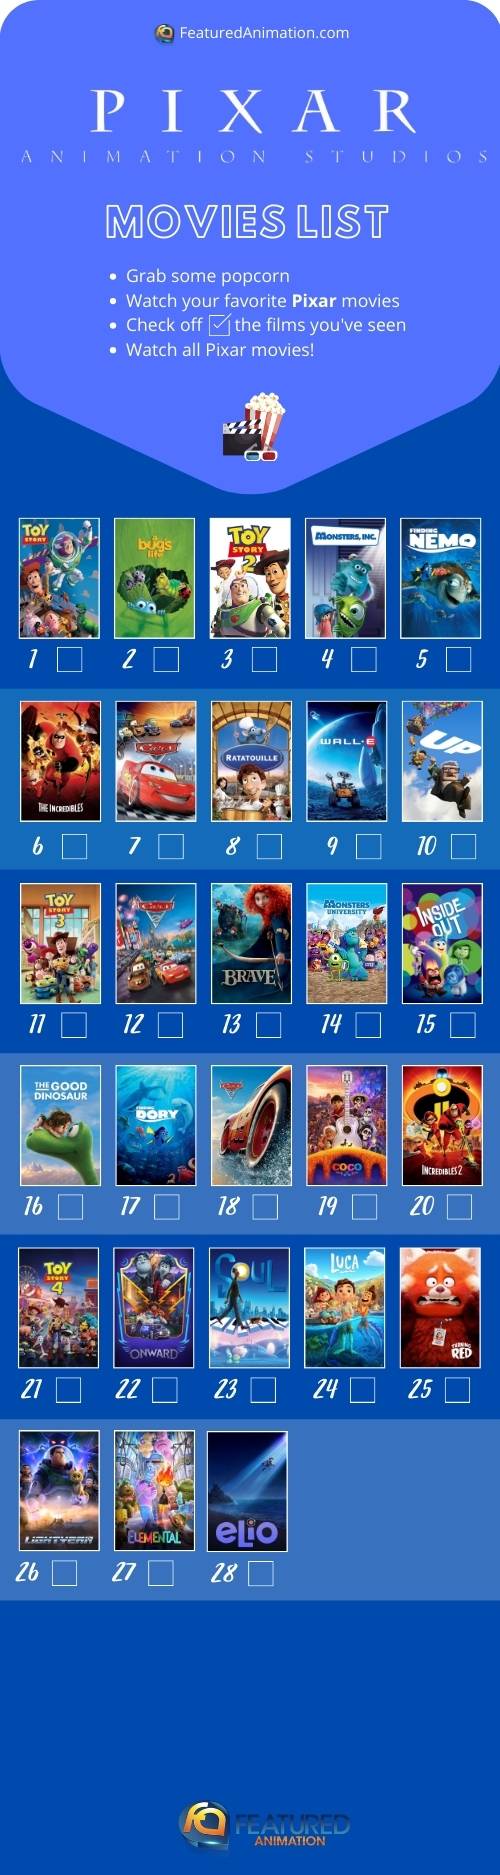 Pixar movies checklist by Featured Animation